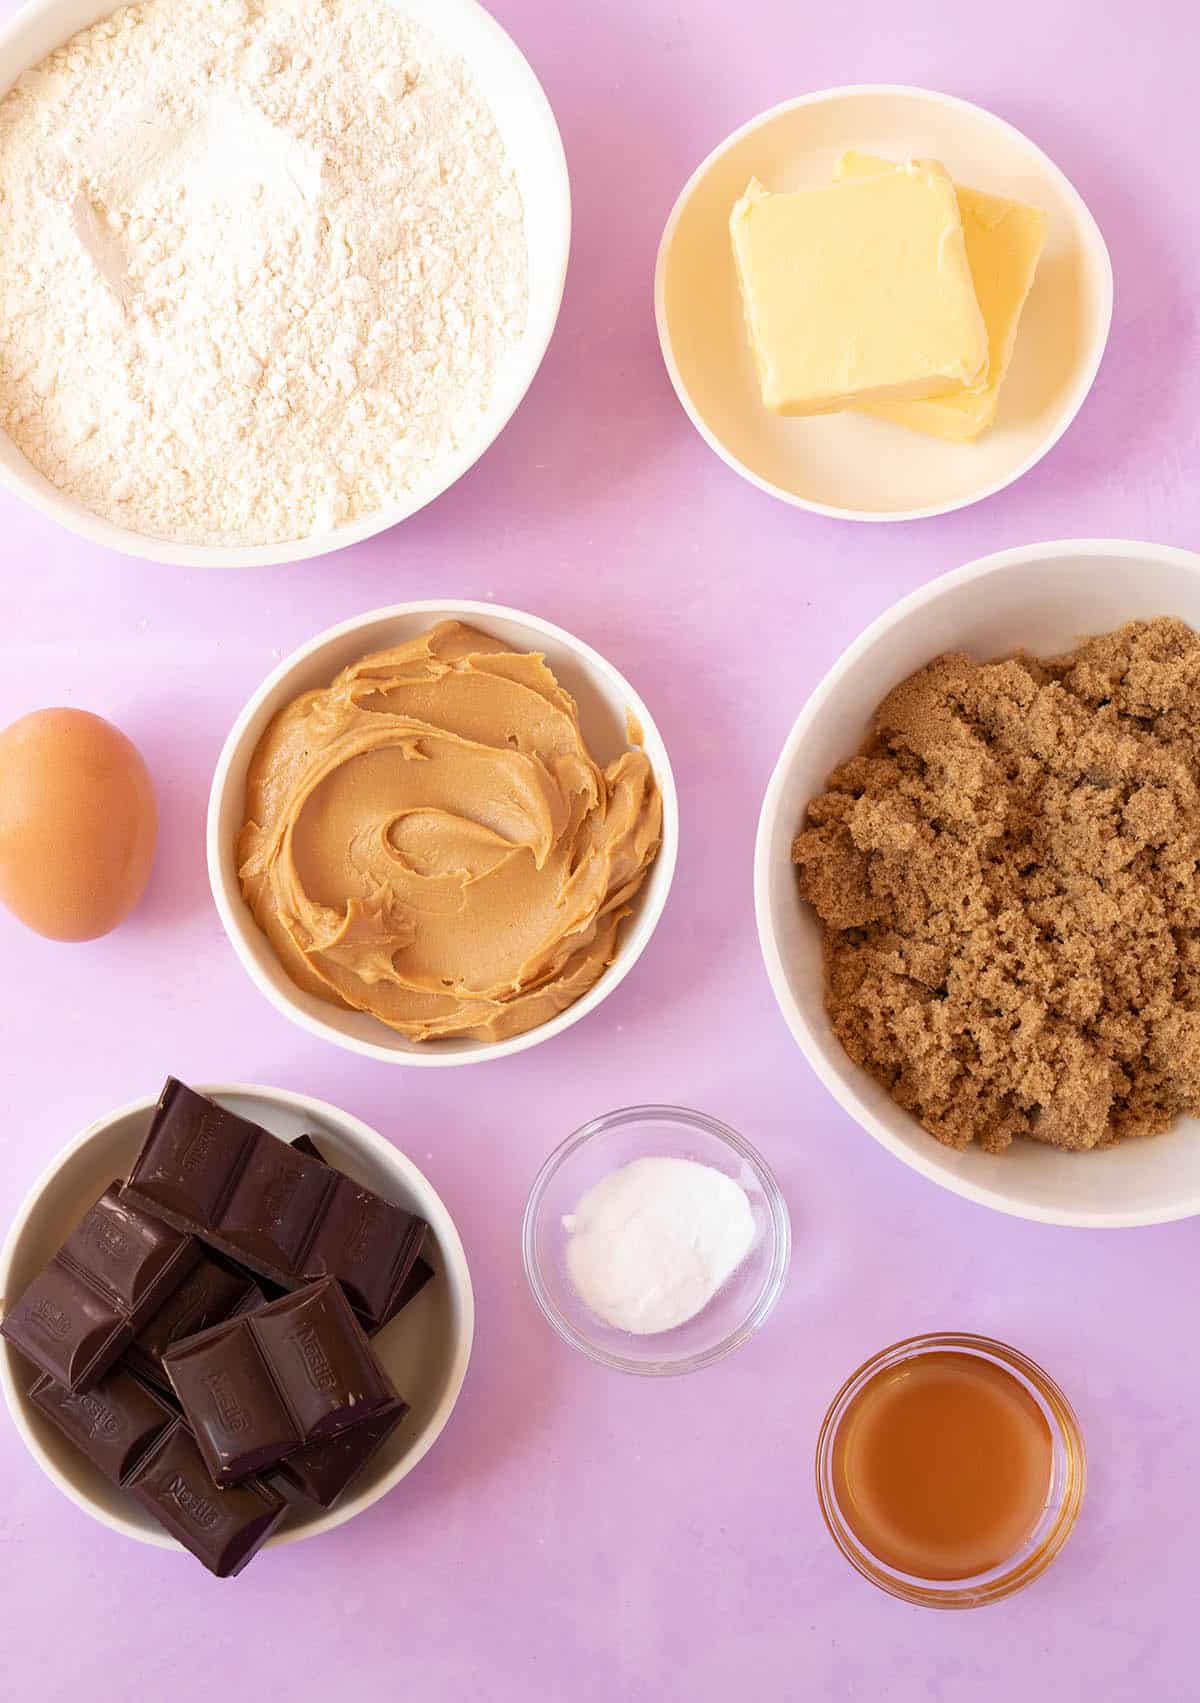 Top view of all the ingredients needed to make Peanut Butter Cookies from scratch.